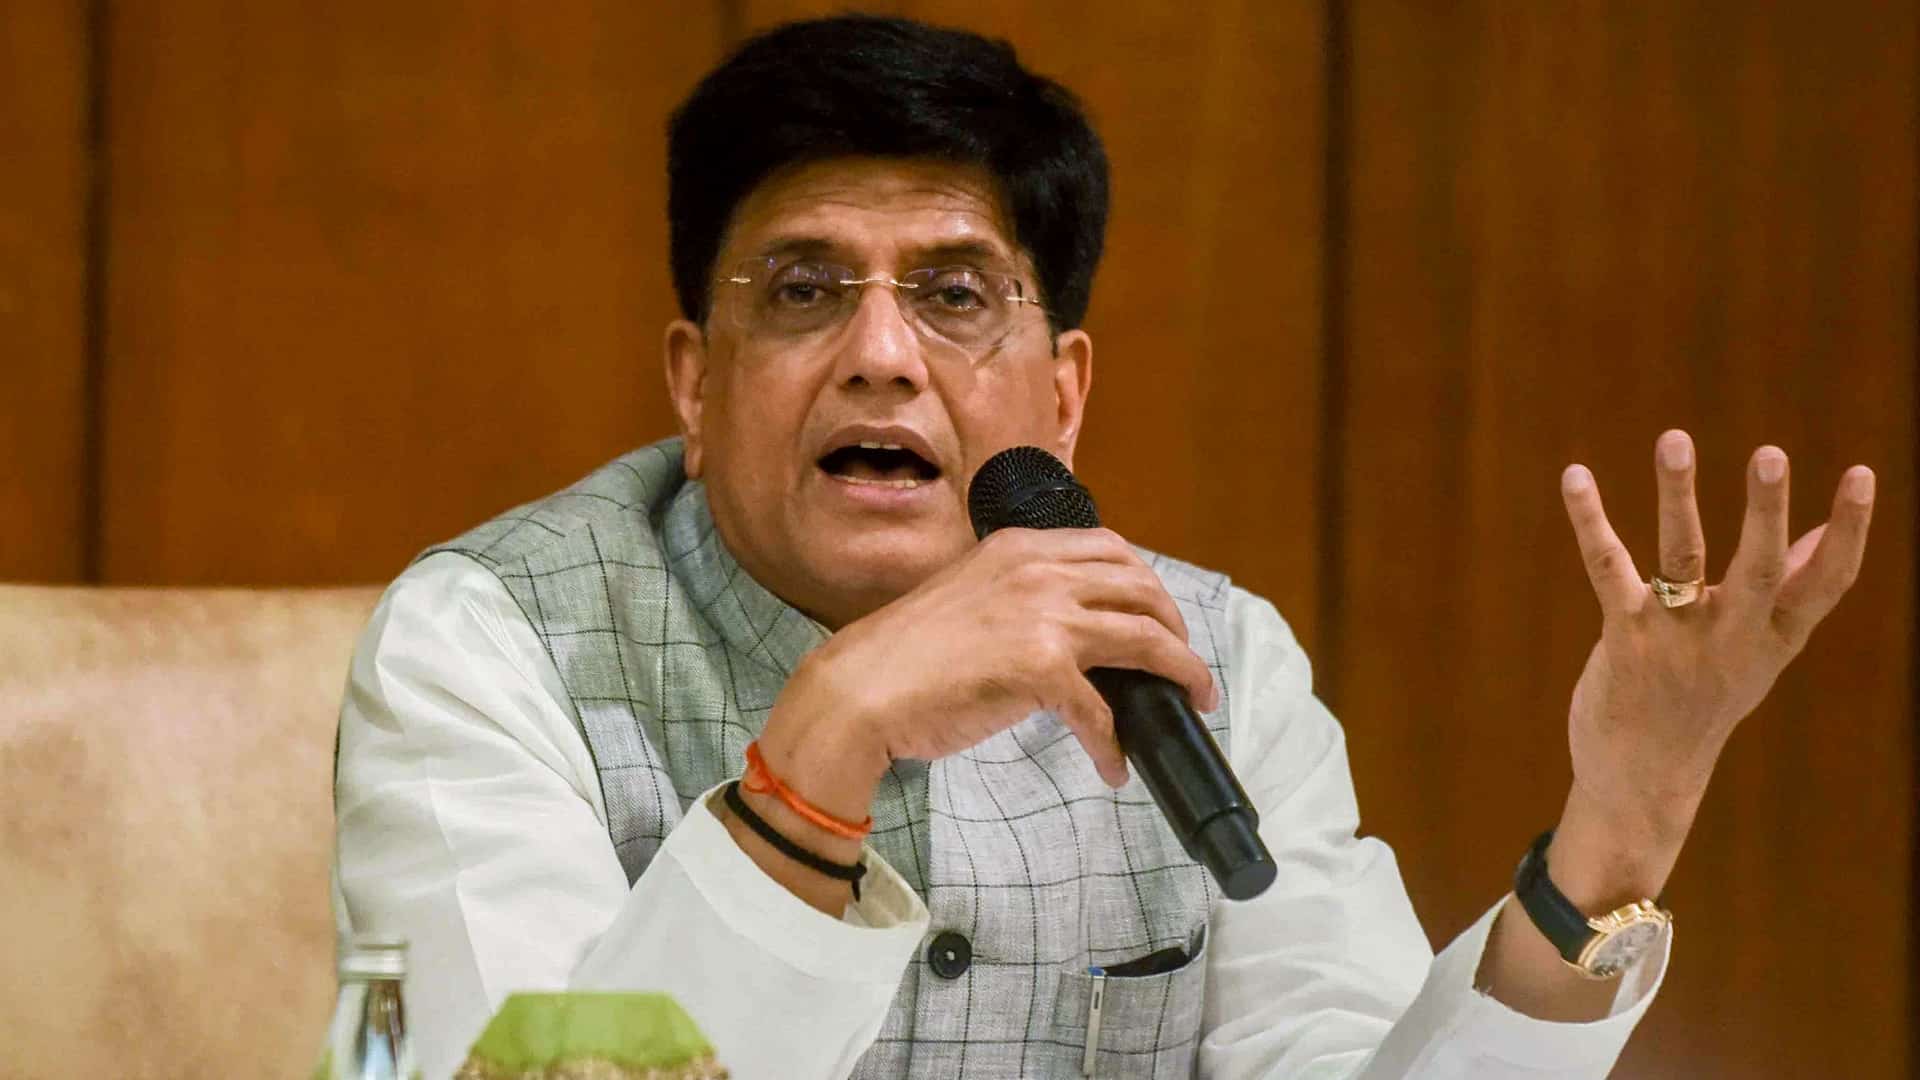 Goyal calls for deepening trade ties with Africa; exploring solar energy, startup ecosystem